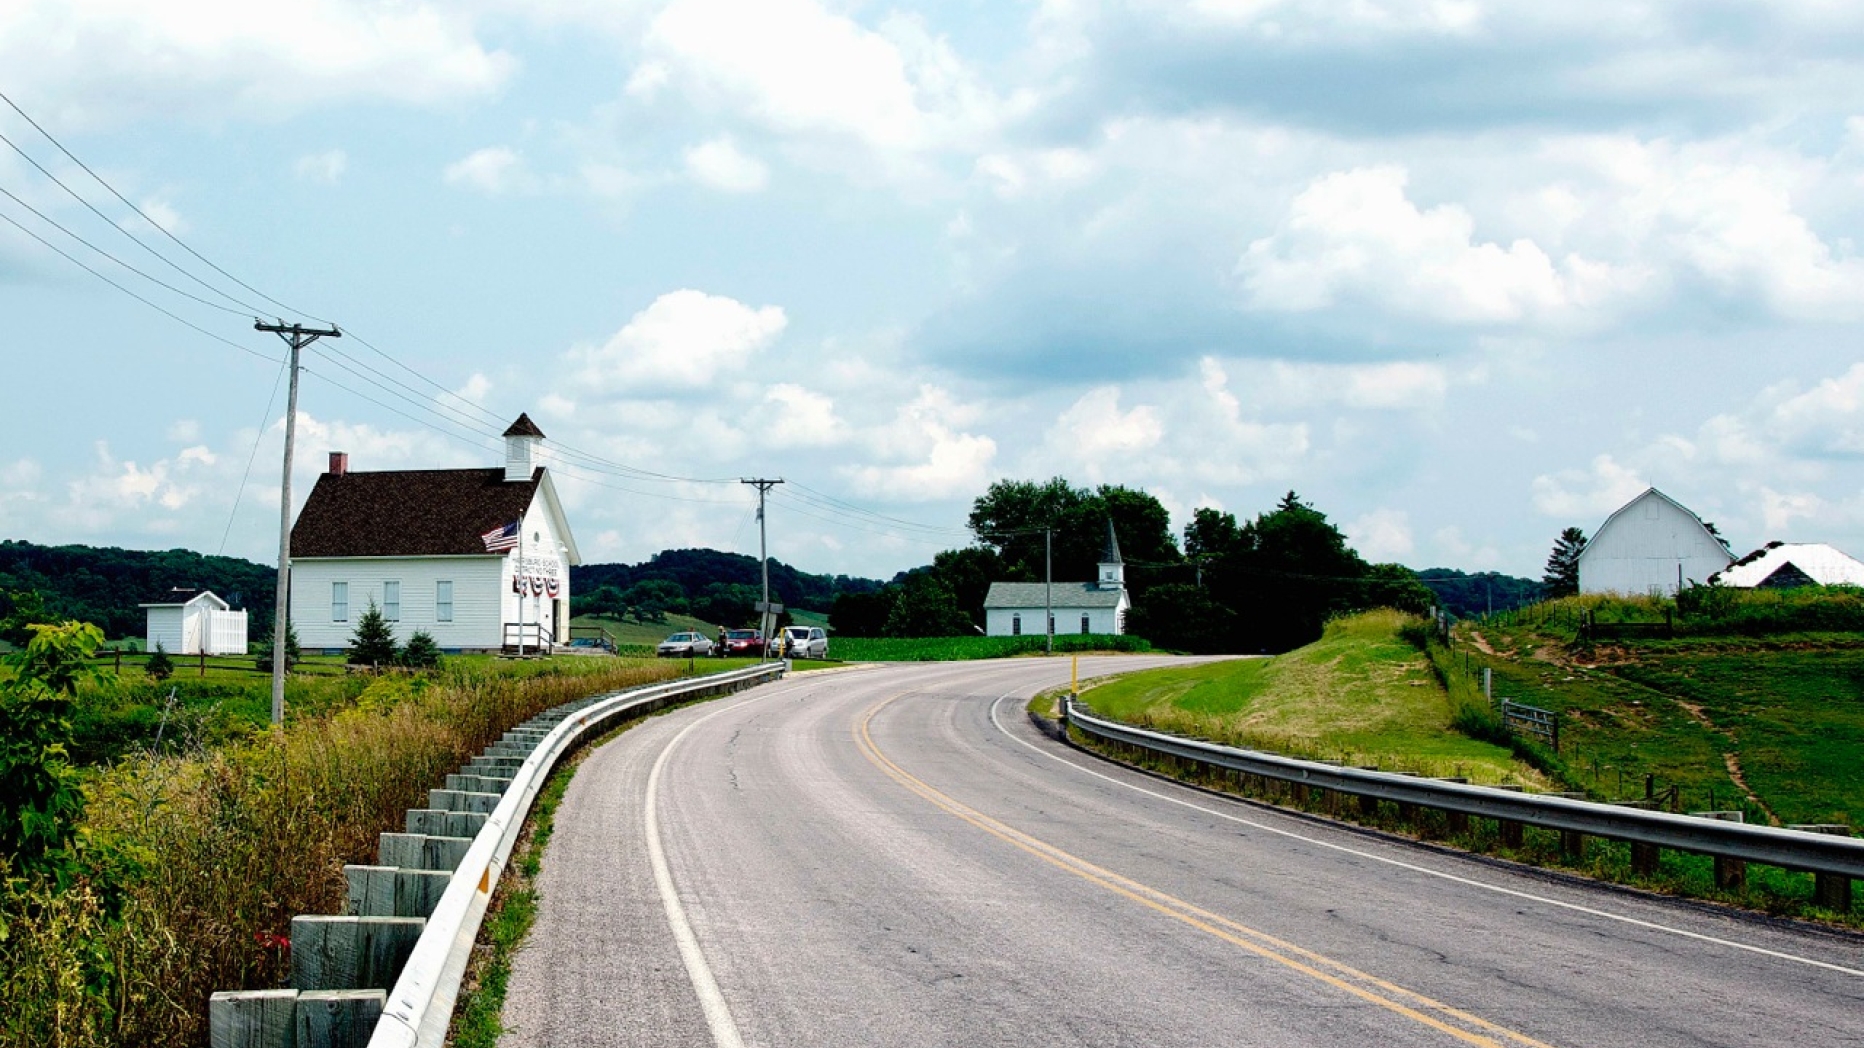 Photograph of section of highway and several houses representing classic American architecture.